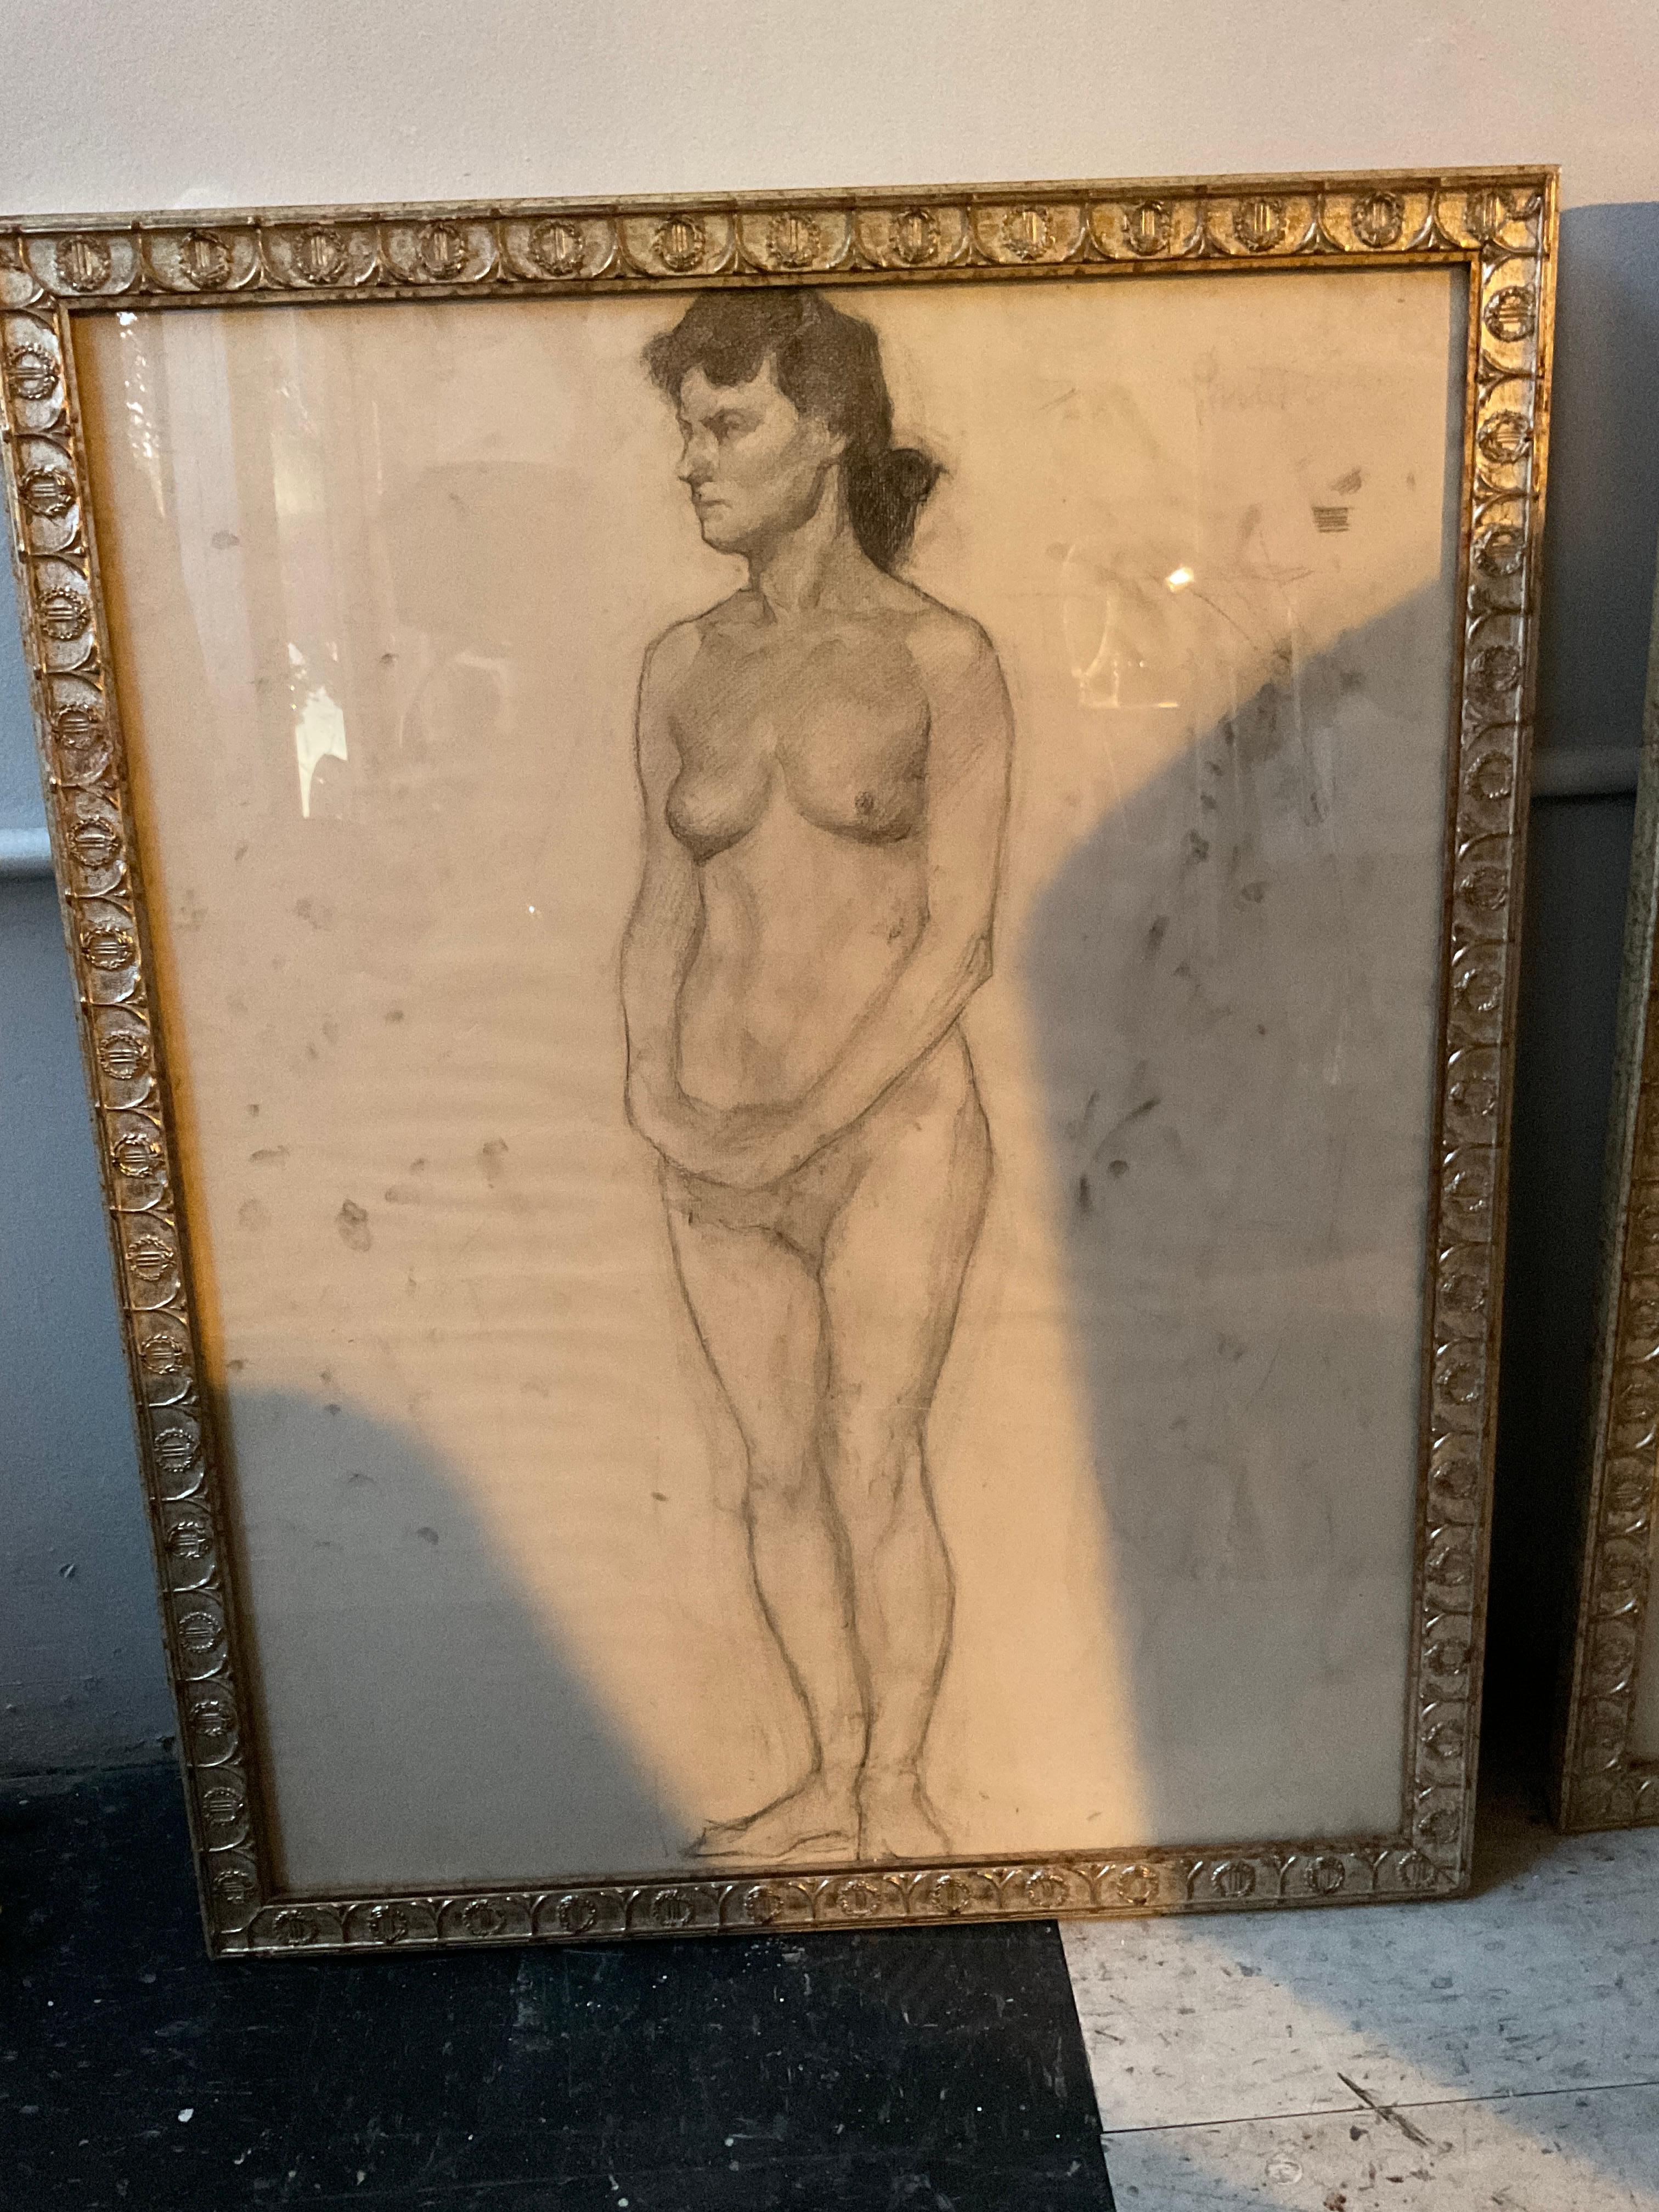 Nude drawing of female drawn in 1898. 450 EACH.
In the main picture, the drawing all the way on the right is sold.